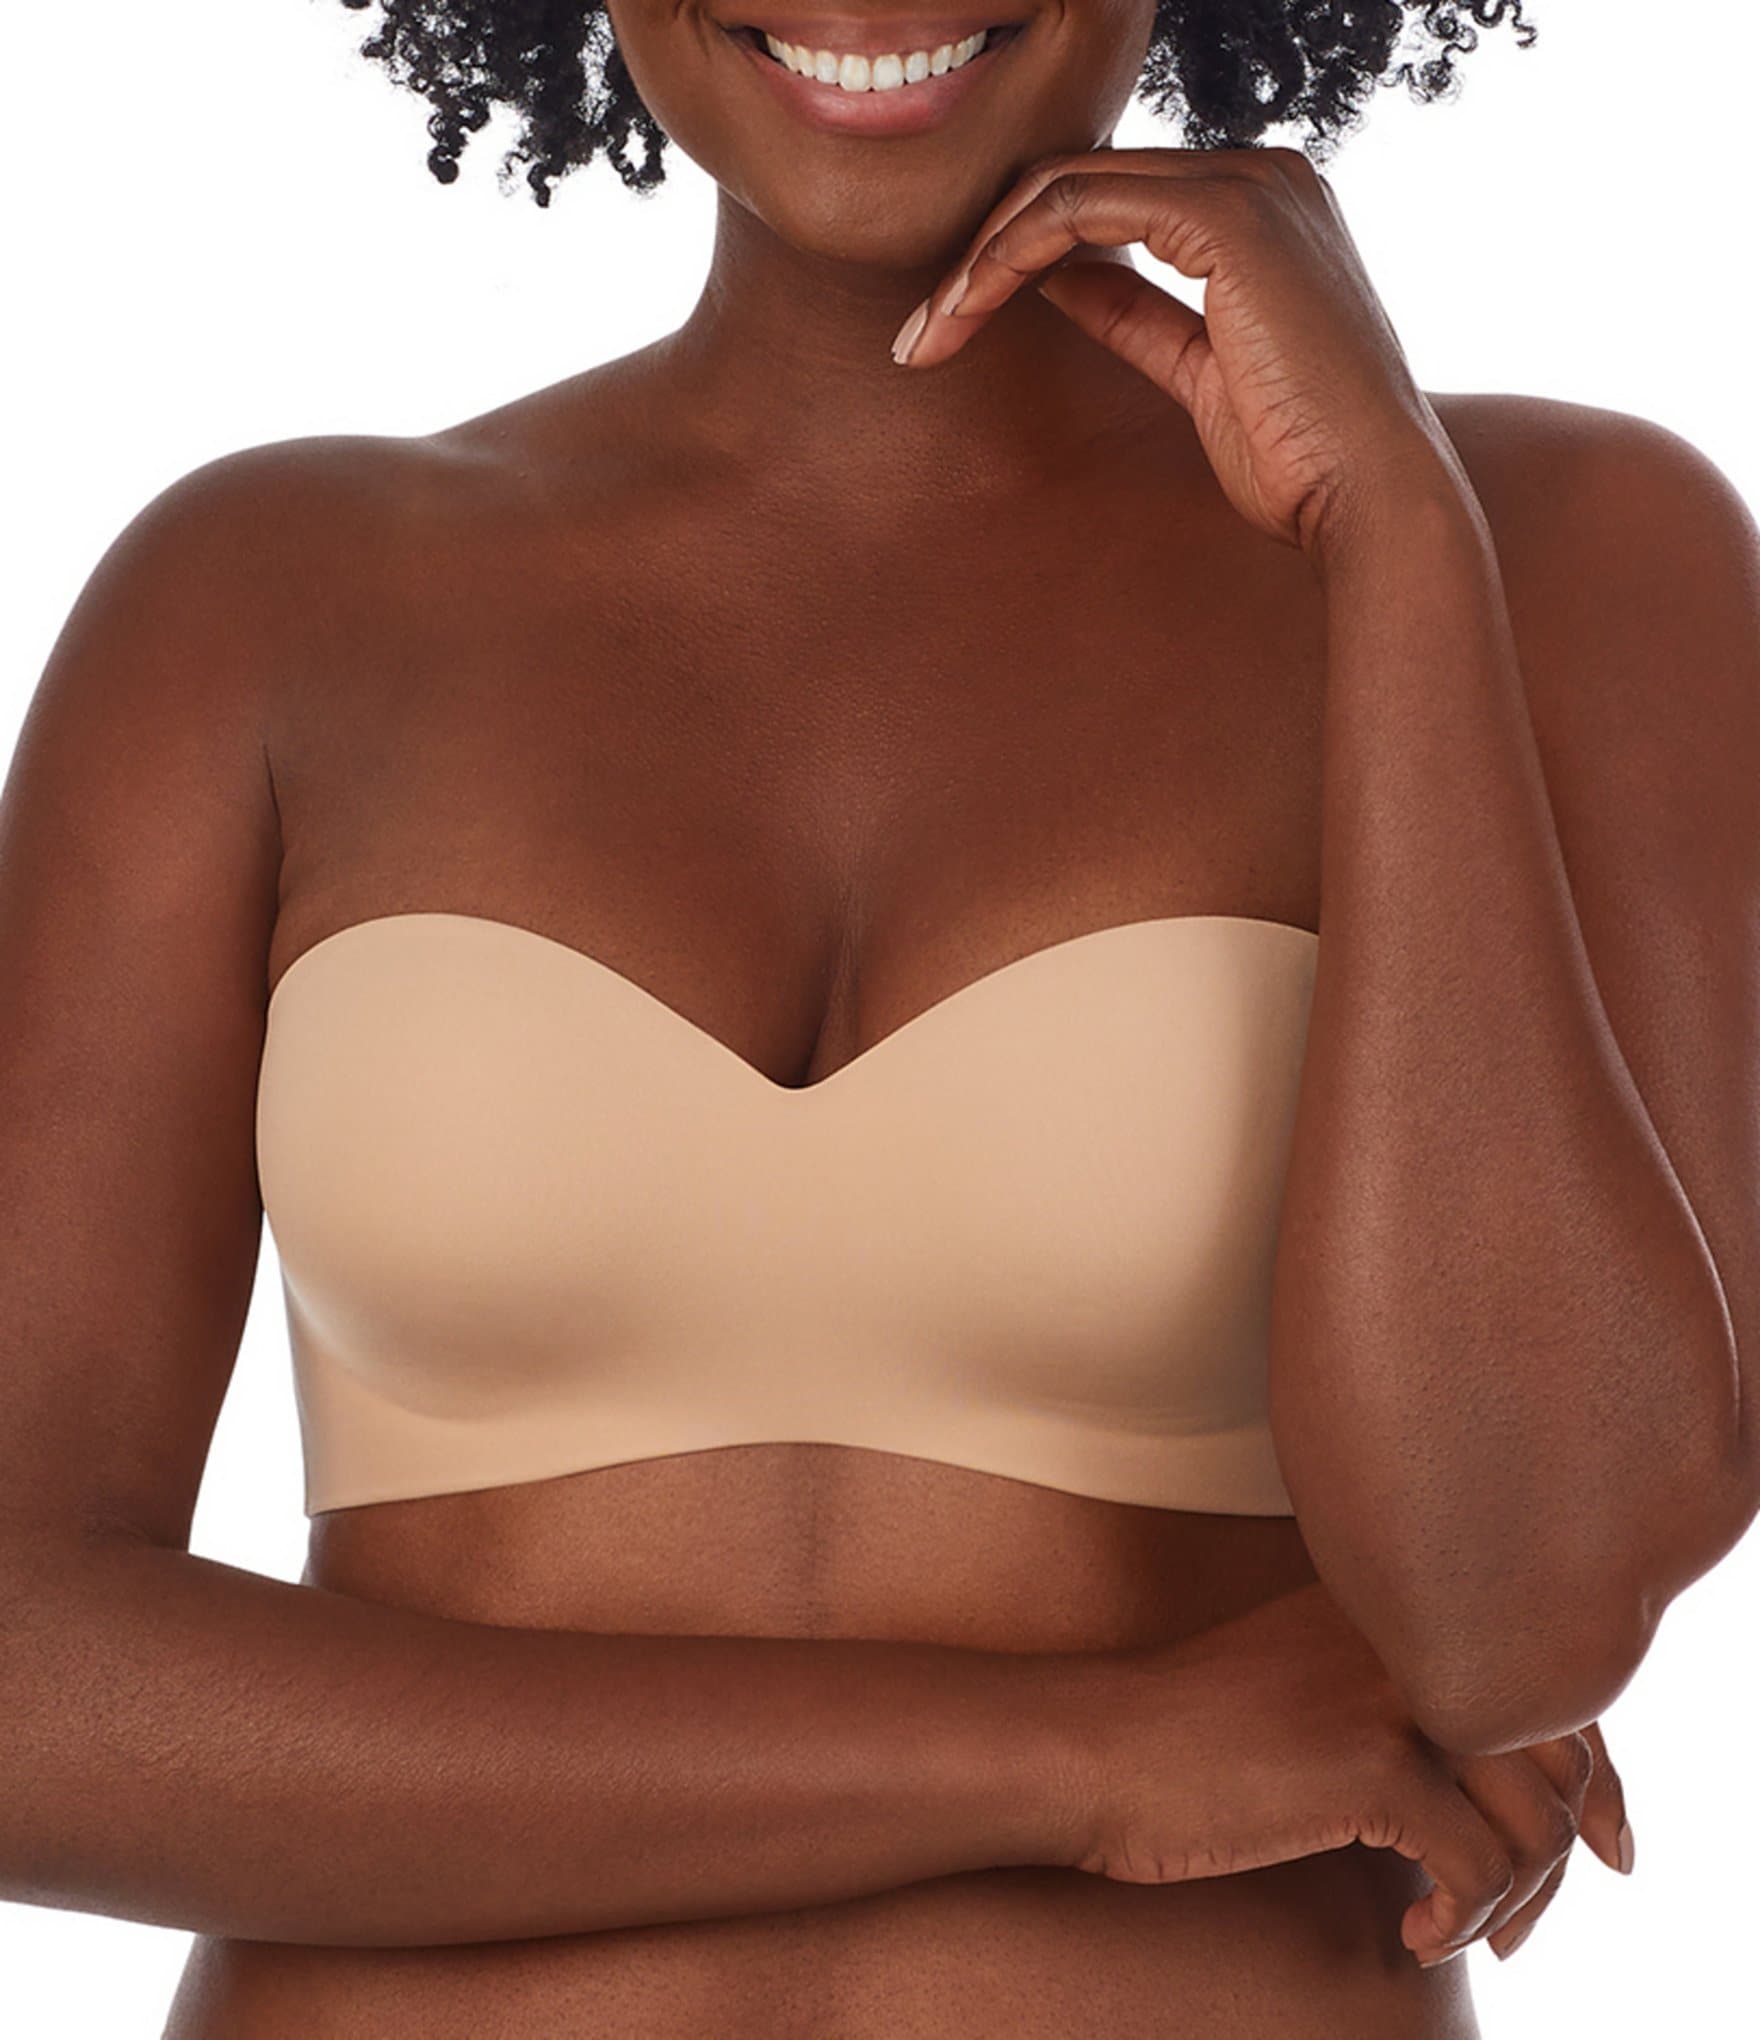 Le Mystere Soiree Full-Busted Underwire Contour Convertible Strapless Bra |  Dillard's